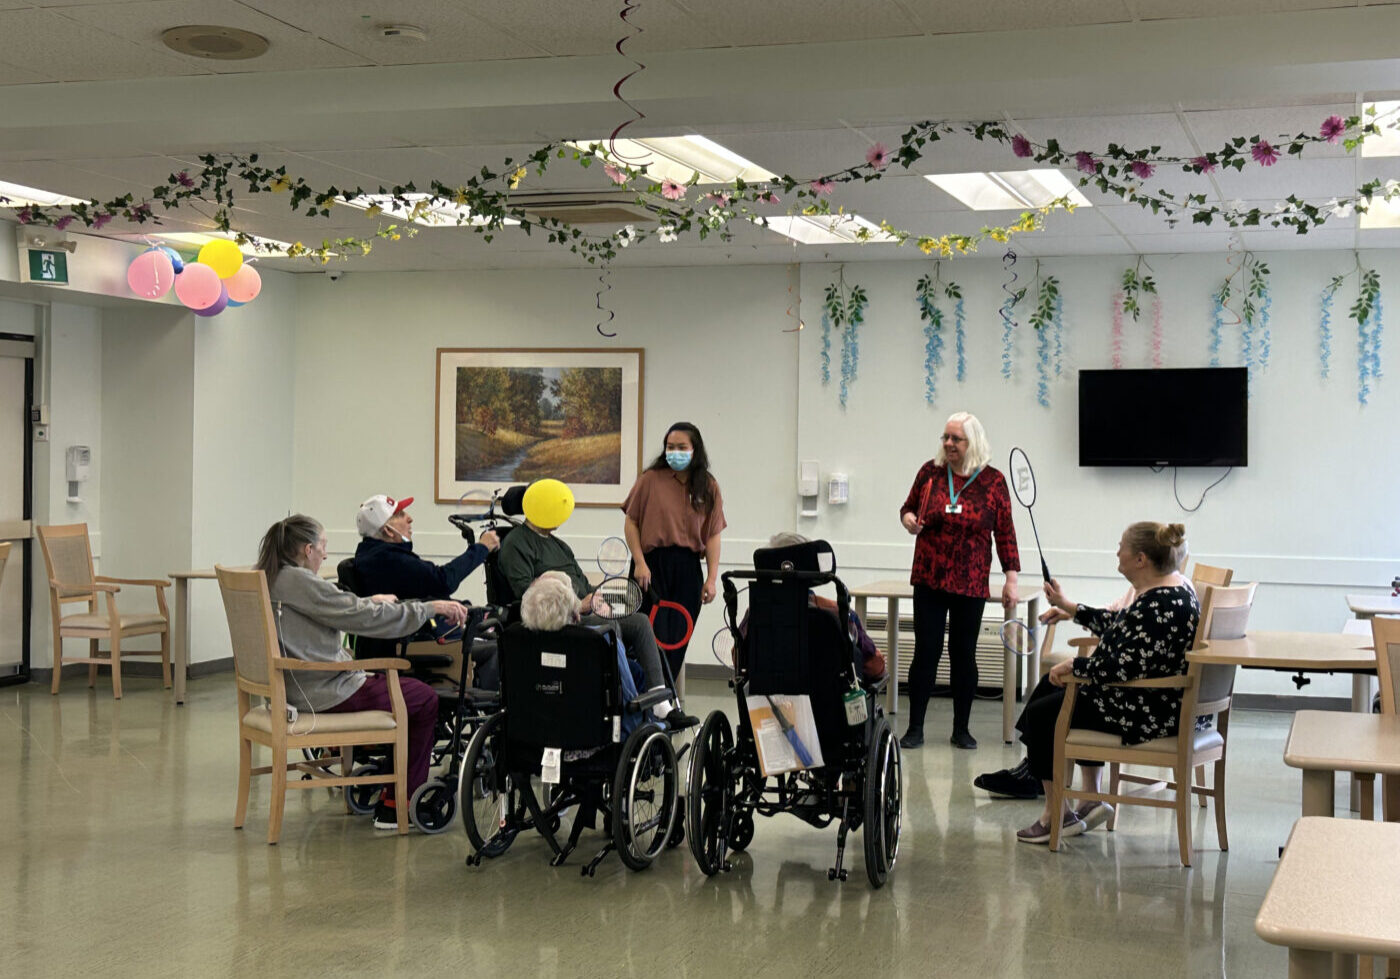 Residents at Main Street Terrace Long-Term Care Home play games together in their main room.